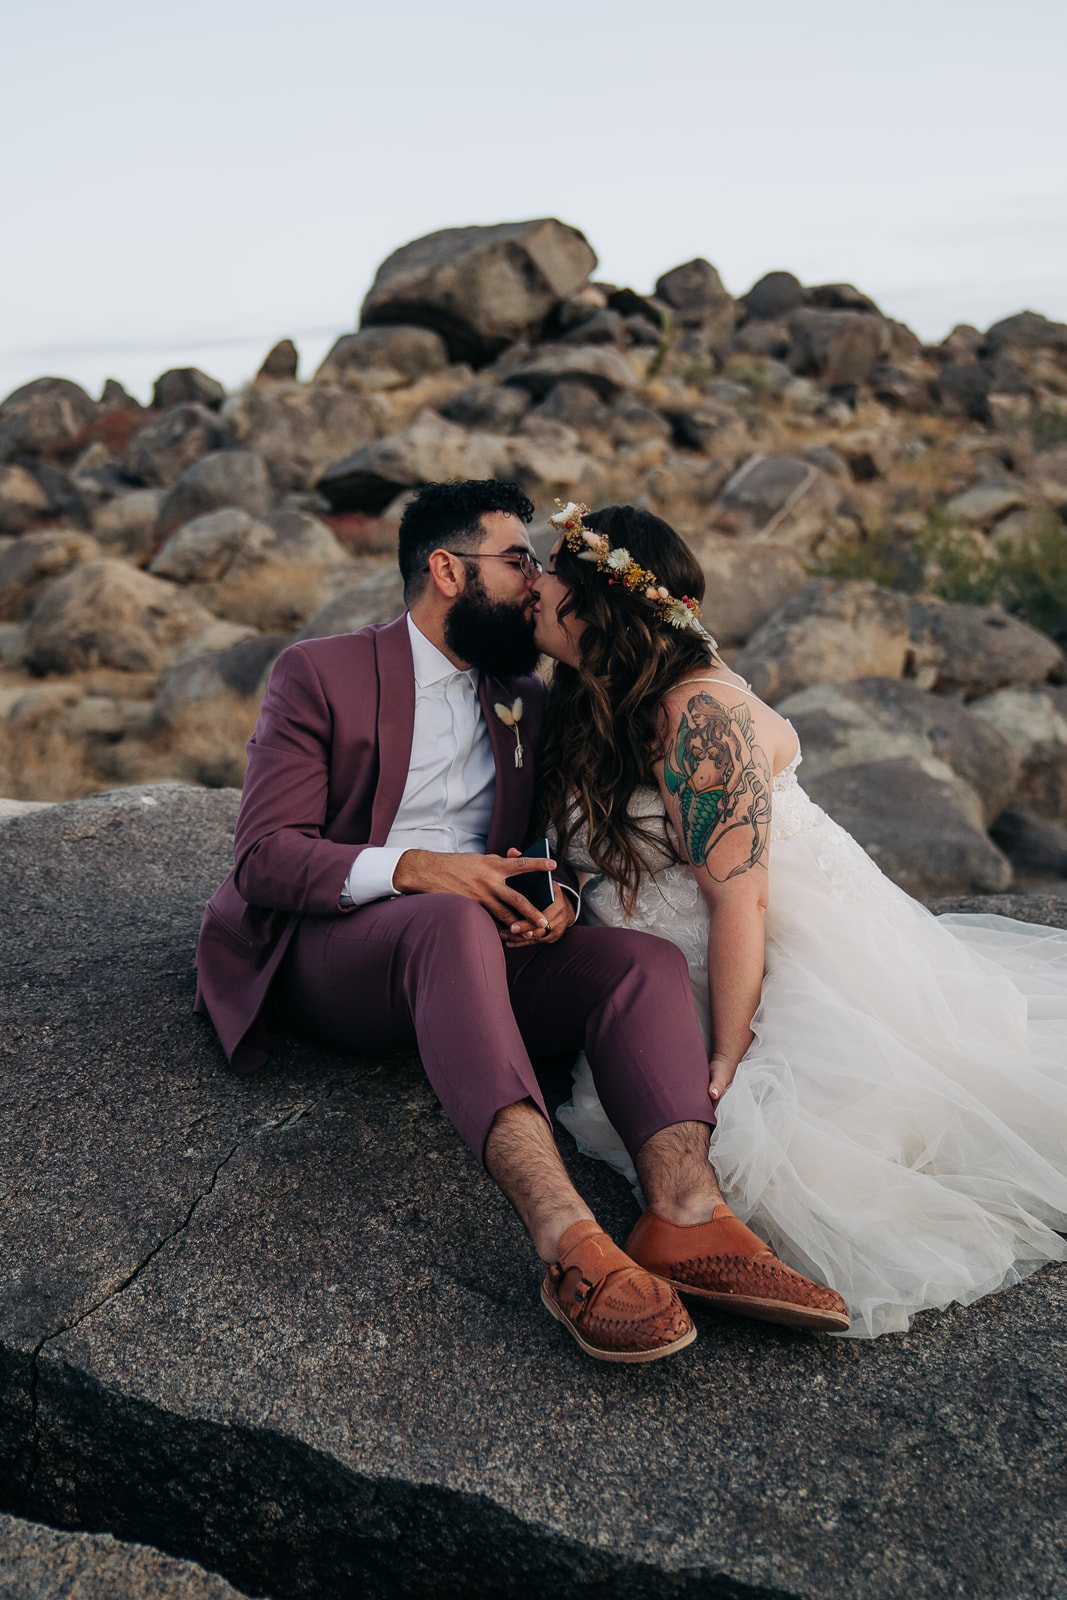 Groom kisses bride while sitting on rock